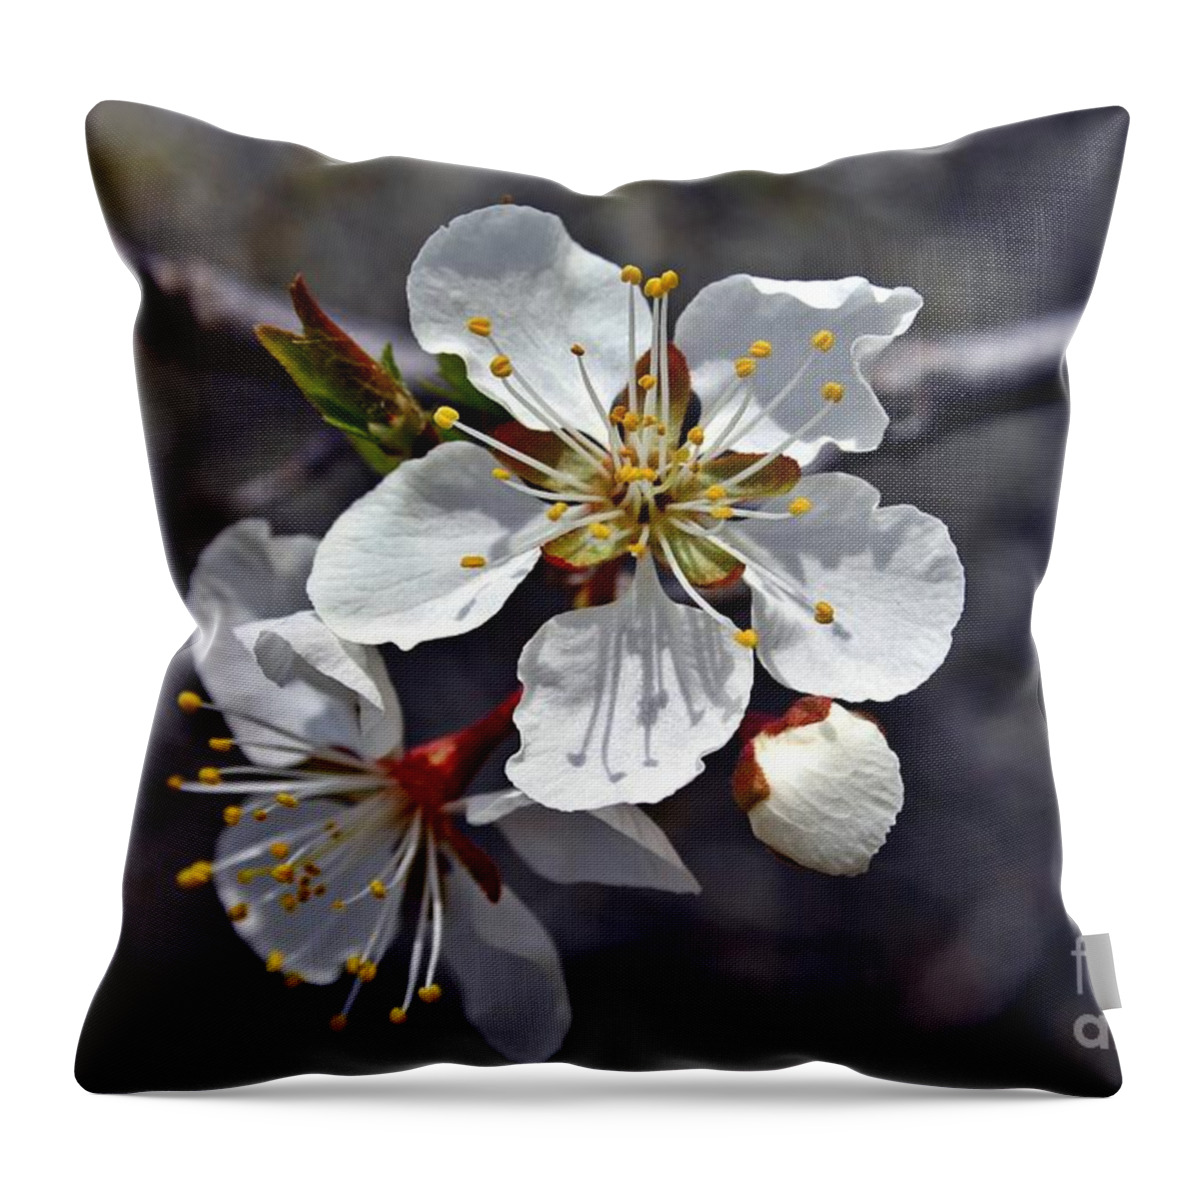 Blossom Throw Pillow featuring the photograph Apple Blossom 3 by Henry Kowalski